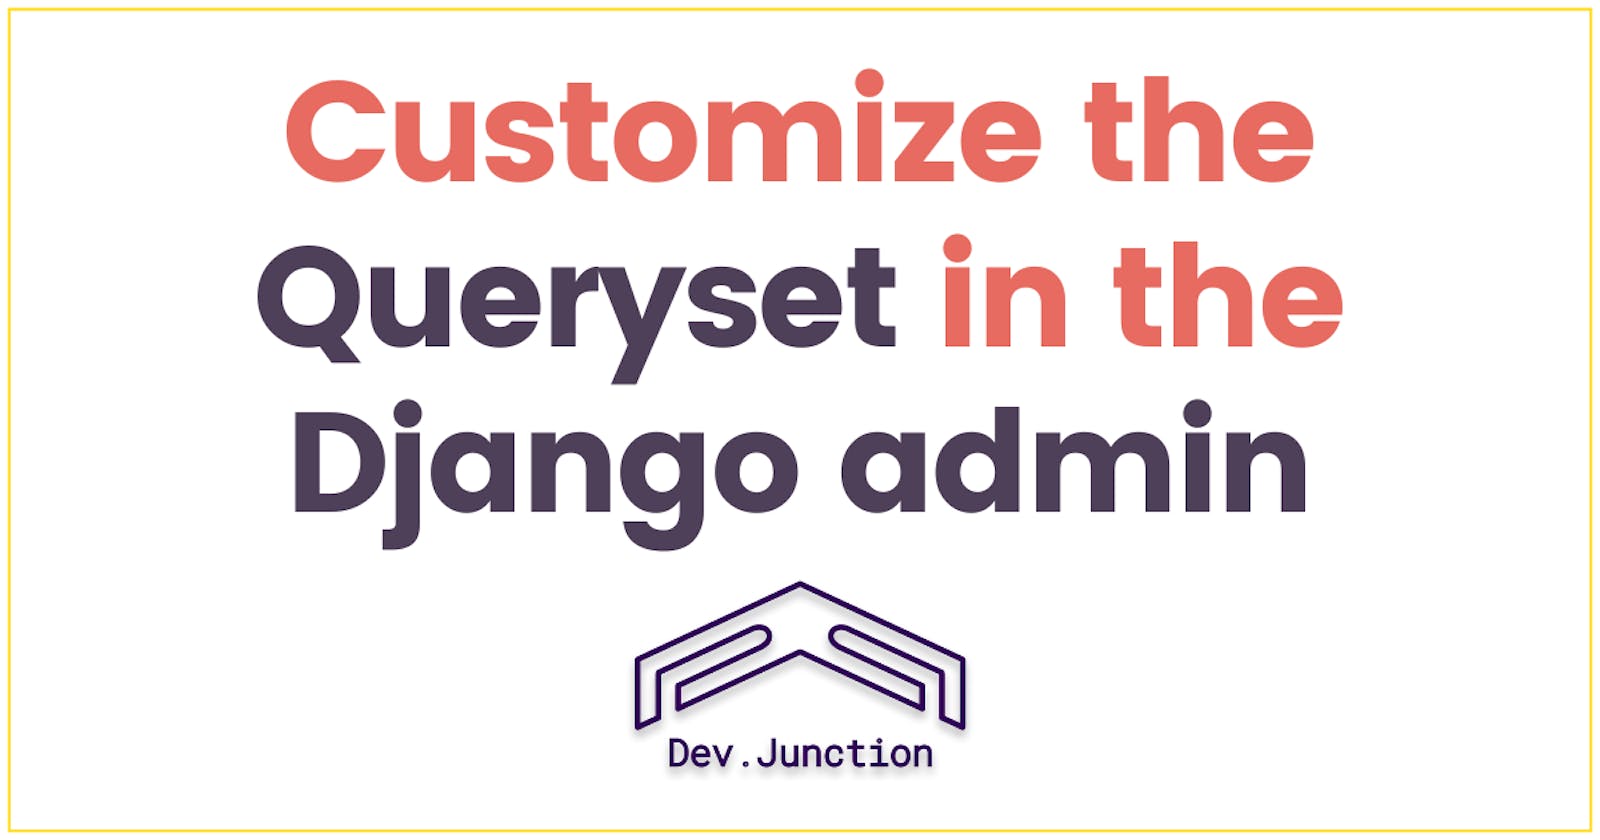 How to customize the Queryset in the Django admin change list view?